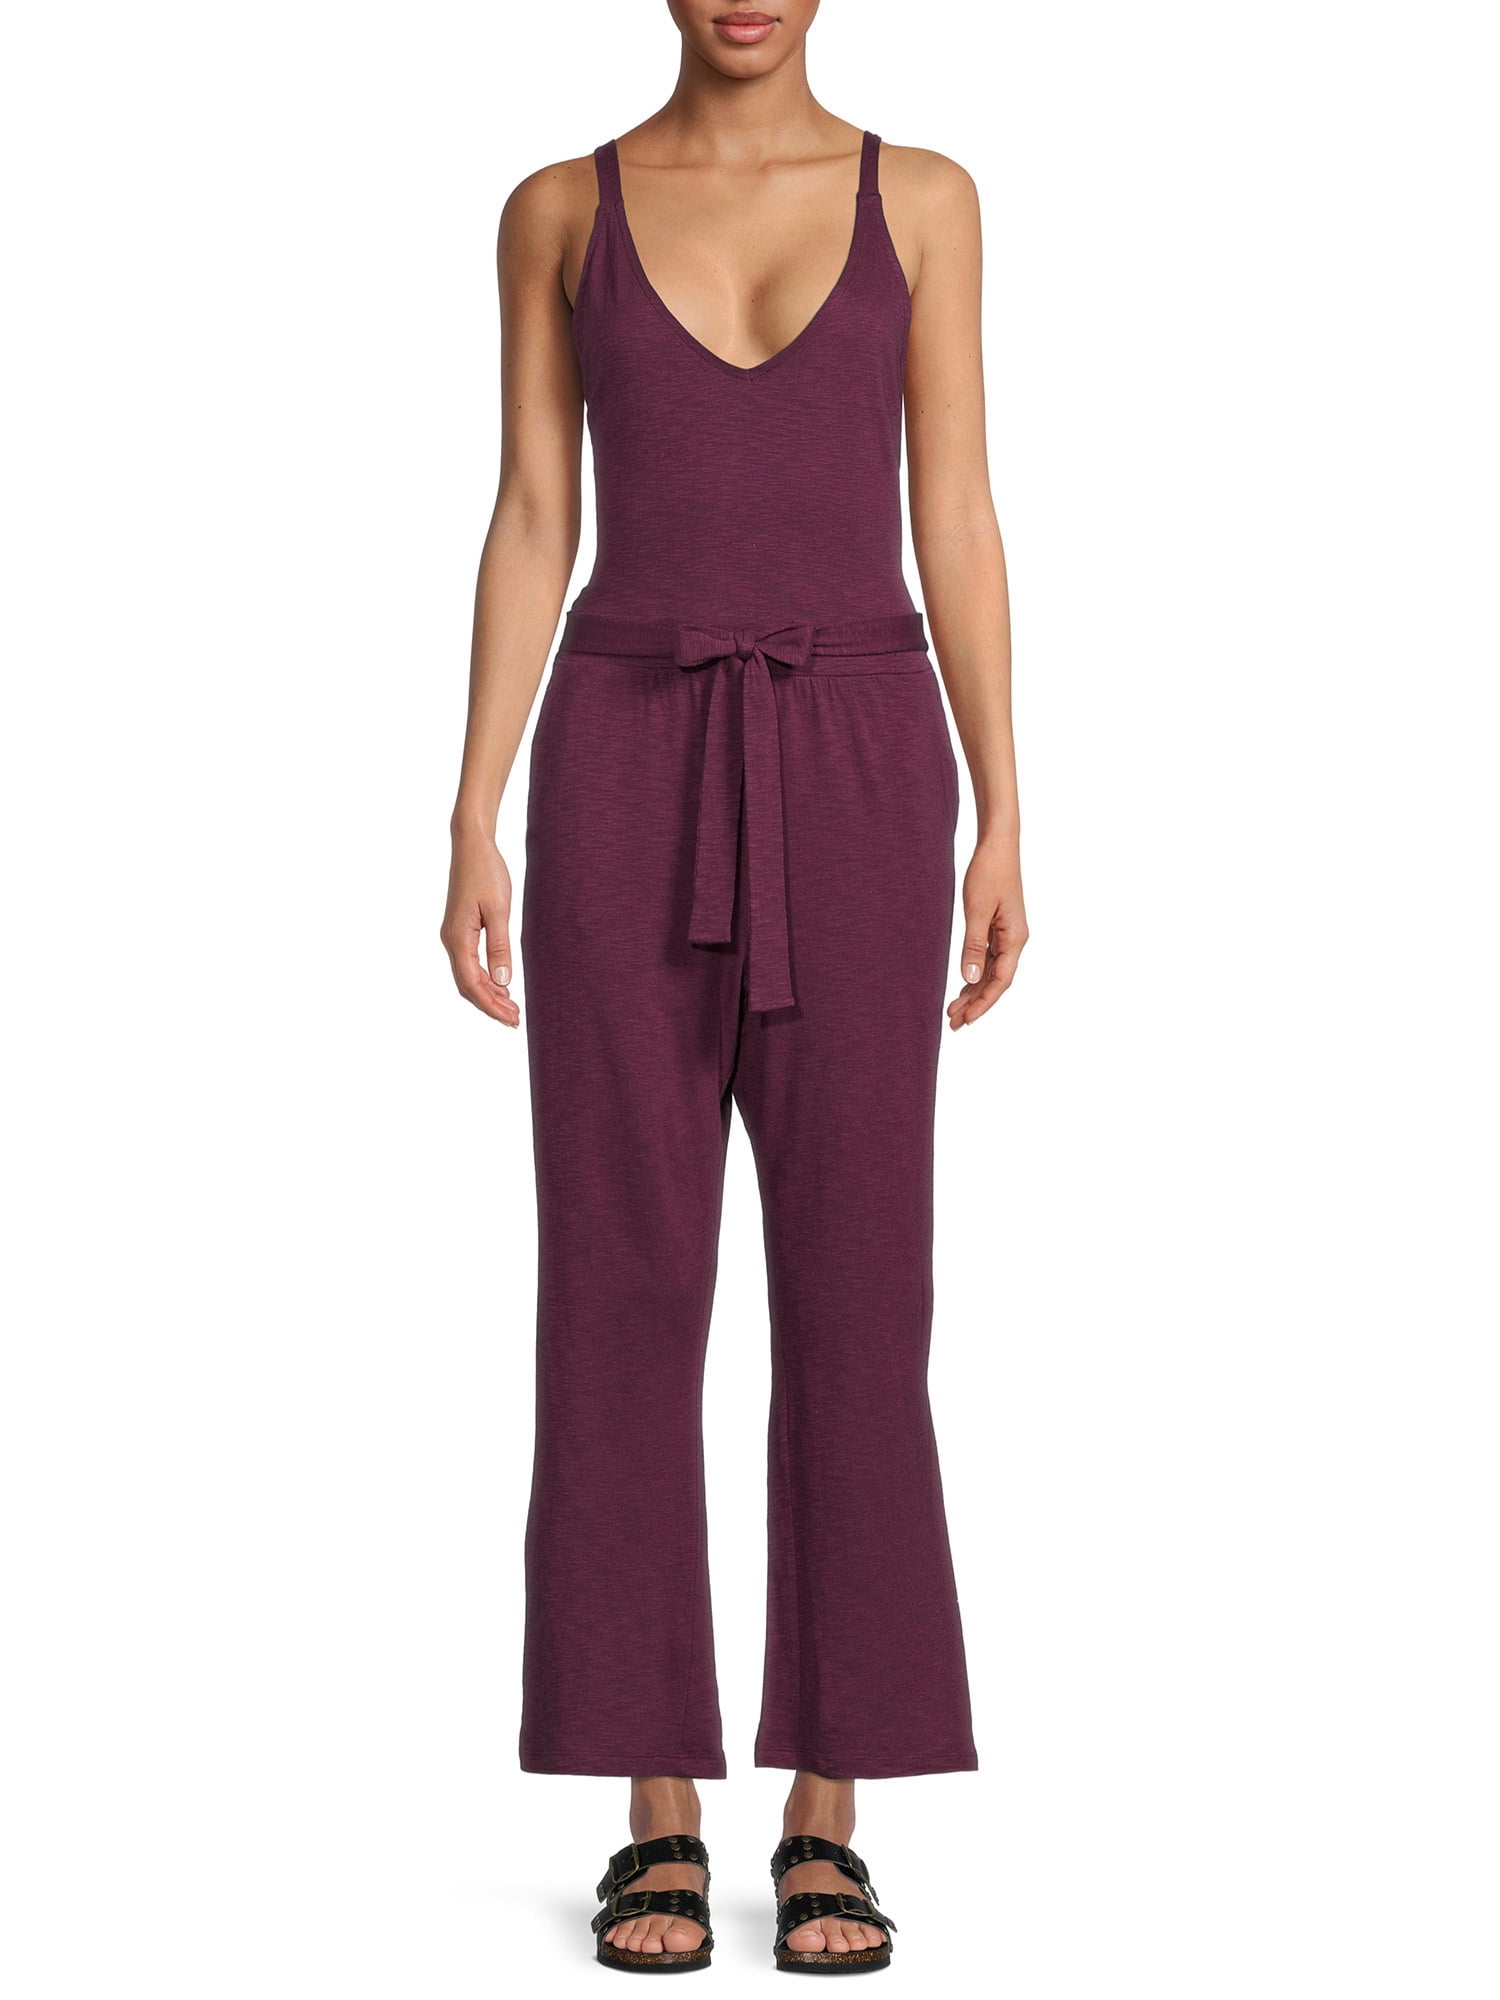 Time and Tru Women’s Sleeveless Jumpsuit $8.62  at Walmart.